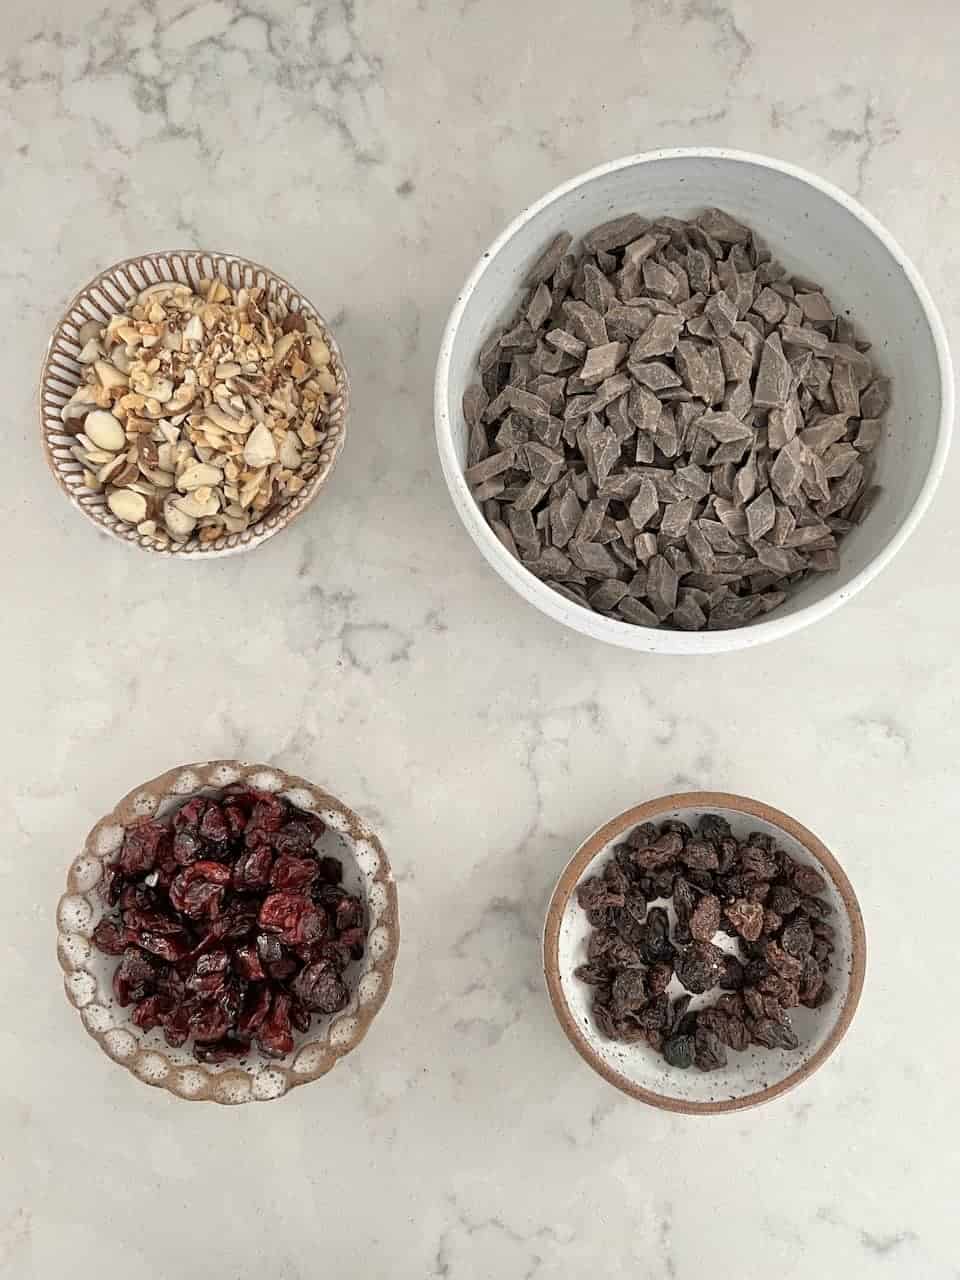 ingredients for Chocolate Fruit Bars in individual bowls against white surface